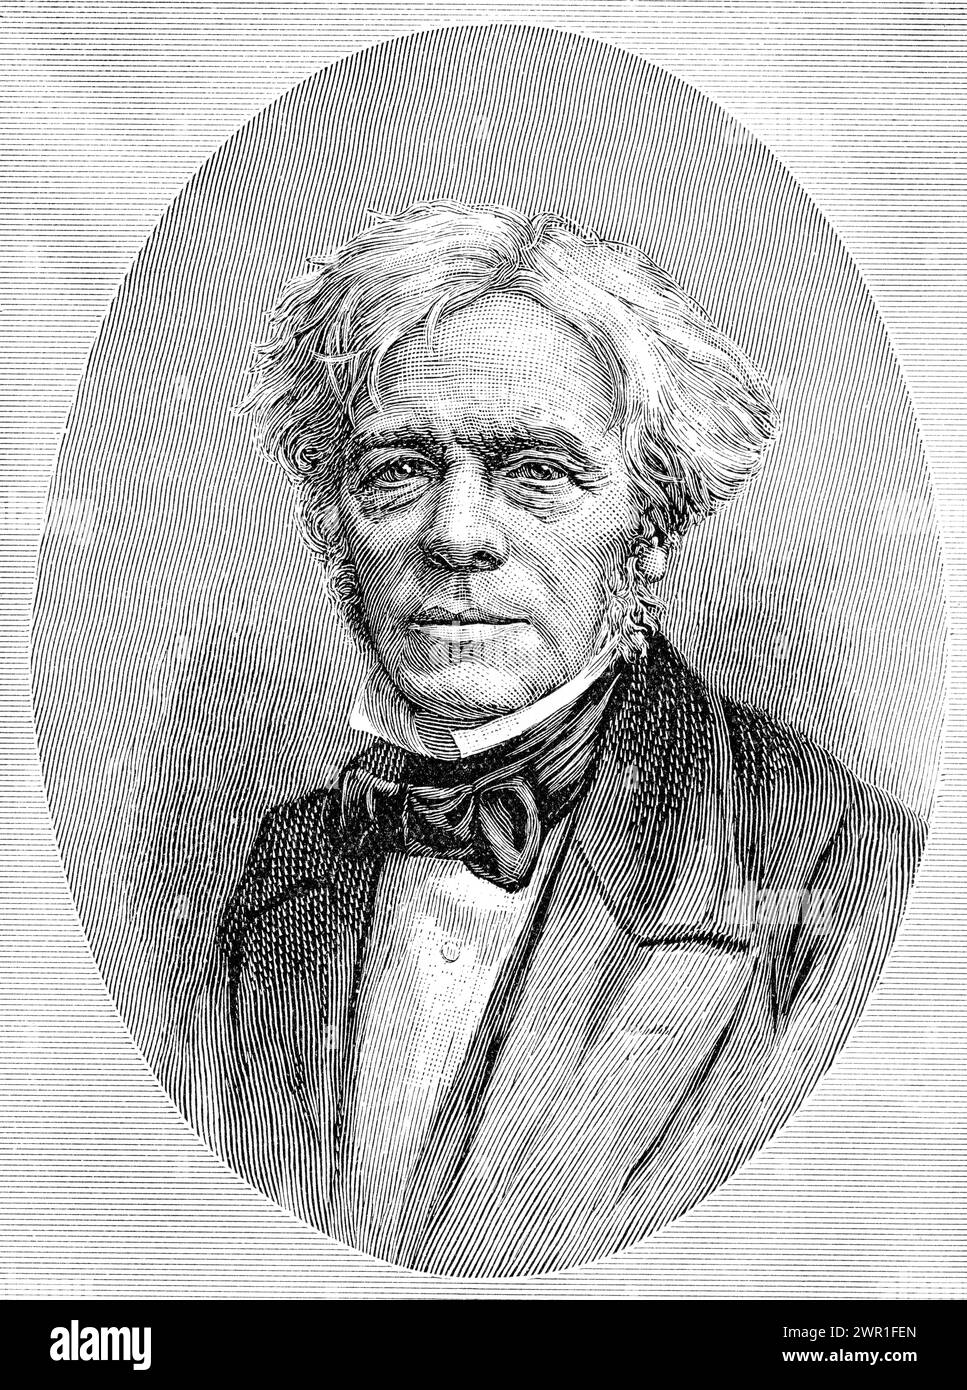 Michael Faraday (1791-1867). After John Watkins (1823-1874). Faraday was an English scientist who contributed to the study of electromagnetism and electrochemistry. His main discoveries include the principles underlying electromagnetic induction, diamagnetism and electrolysis. Stock Photo